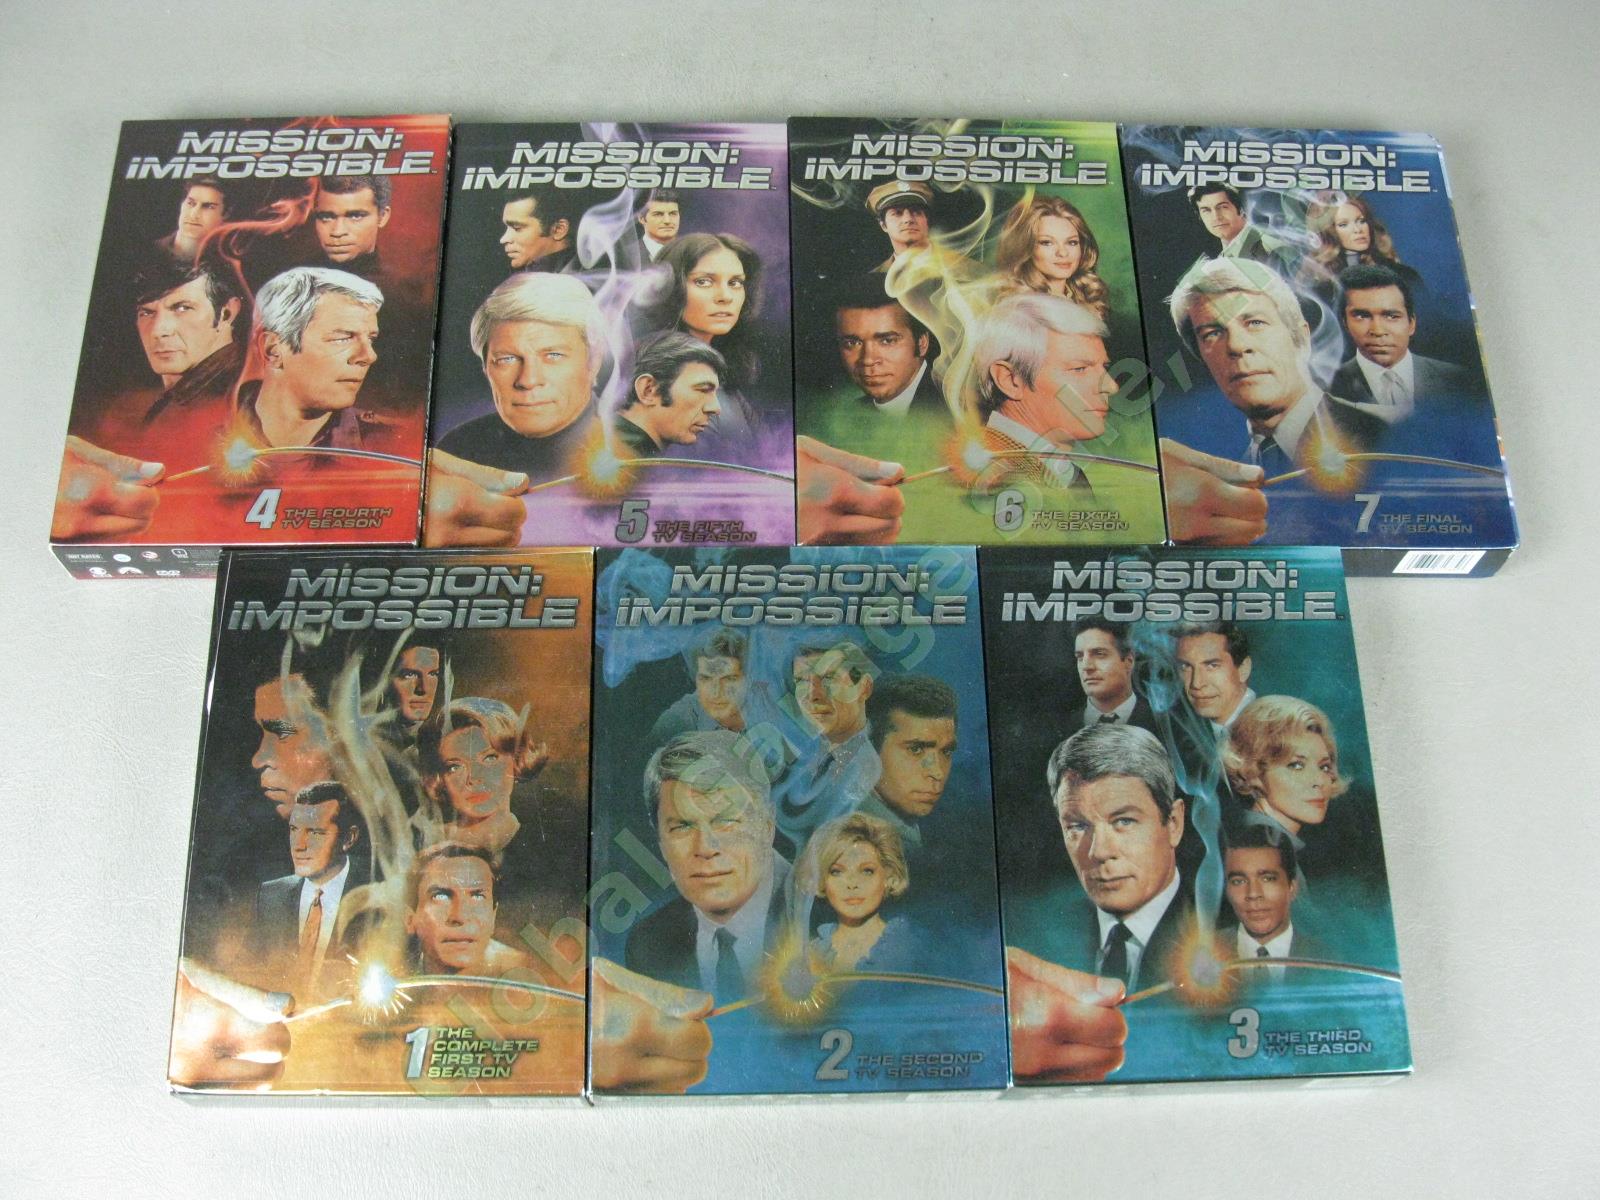 Mission Impossible Complete TV Series DVD Box Set Lot Seasons 1 2 3 4 5 6 7 NR! 2